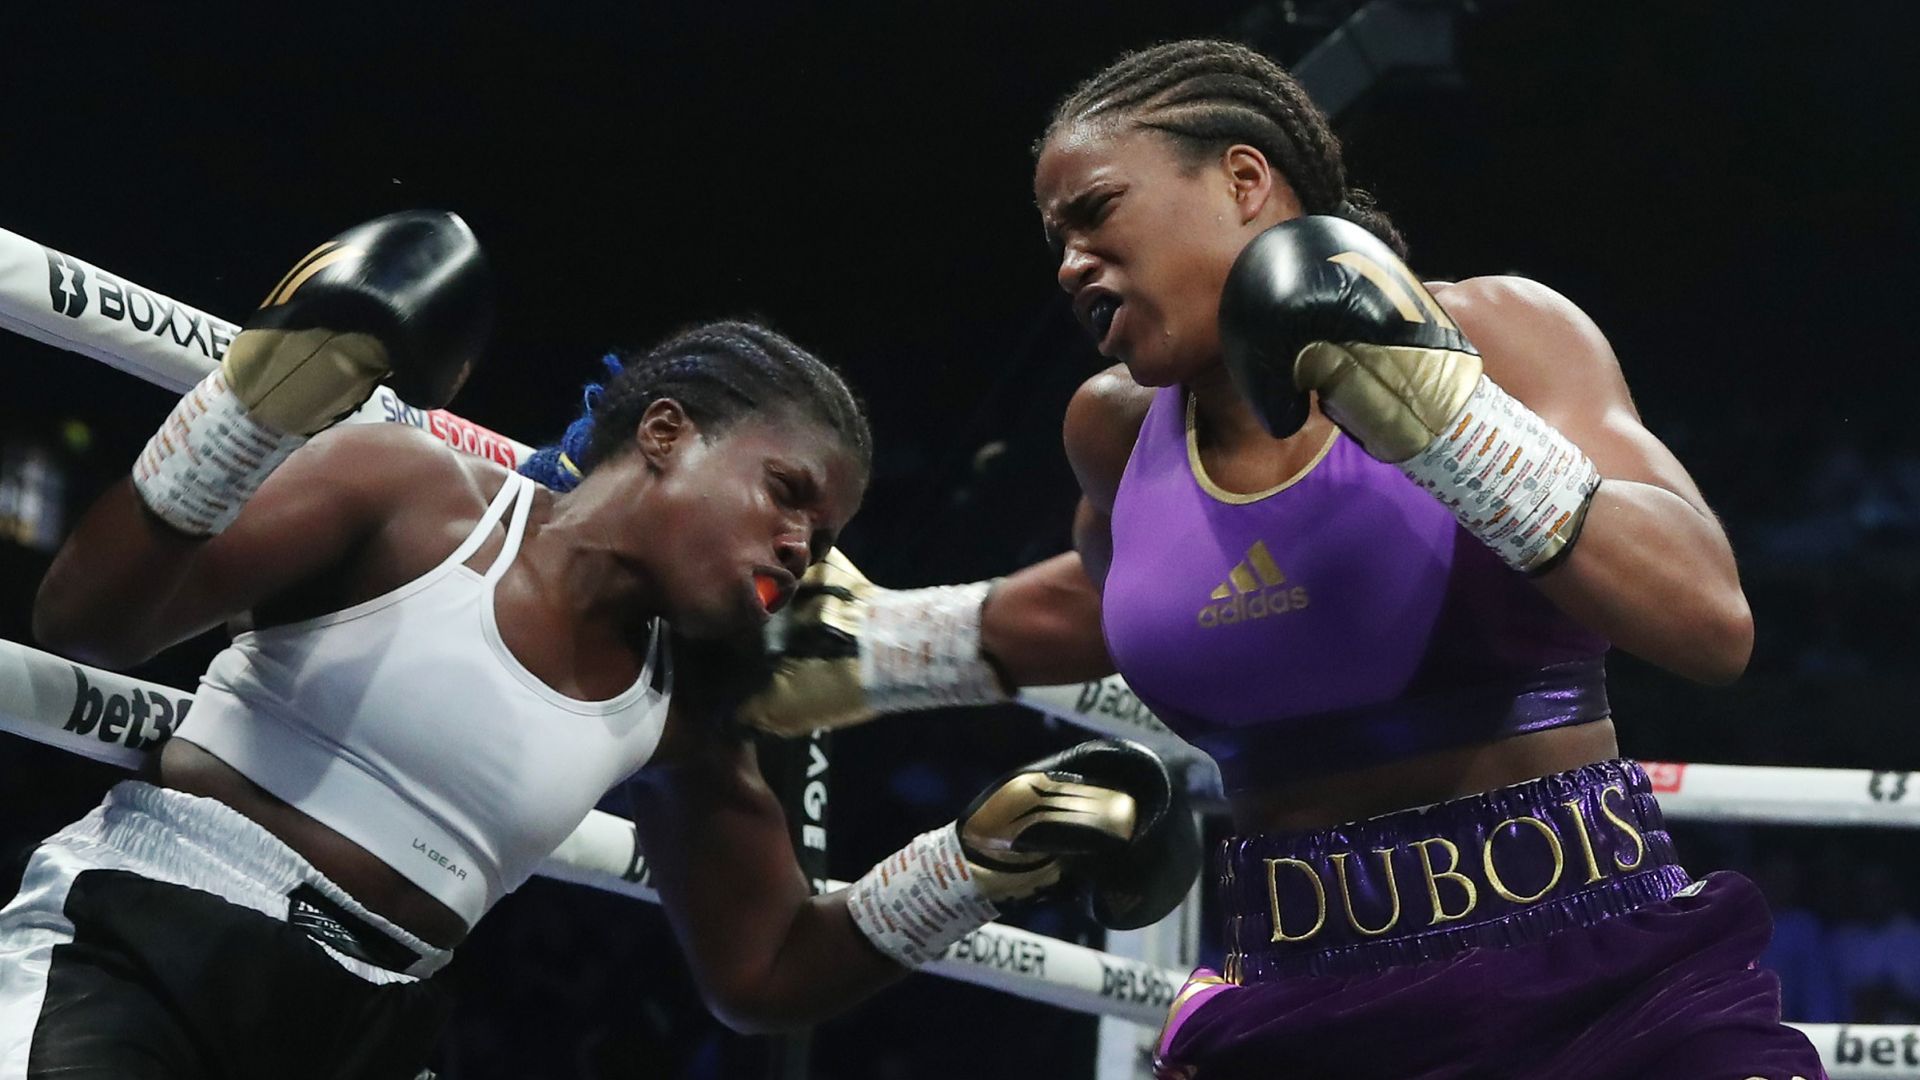 Dubois: 'If I can't defeat this girl, I can't be fighting for world titles can I?'